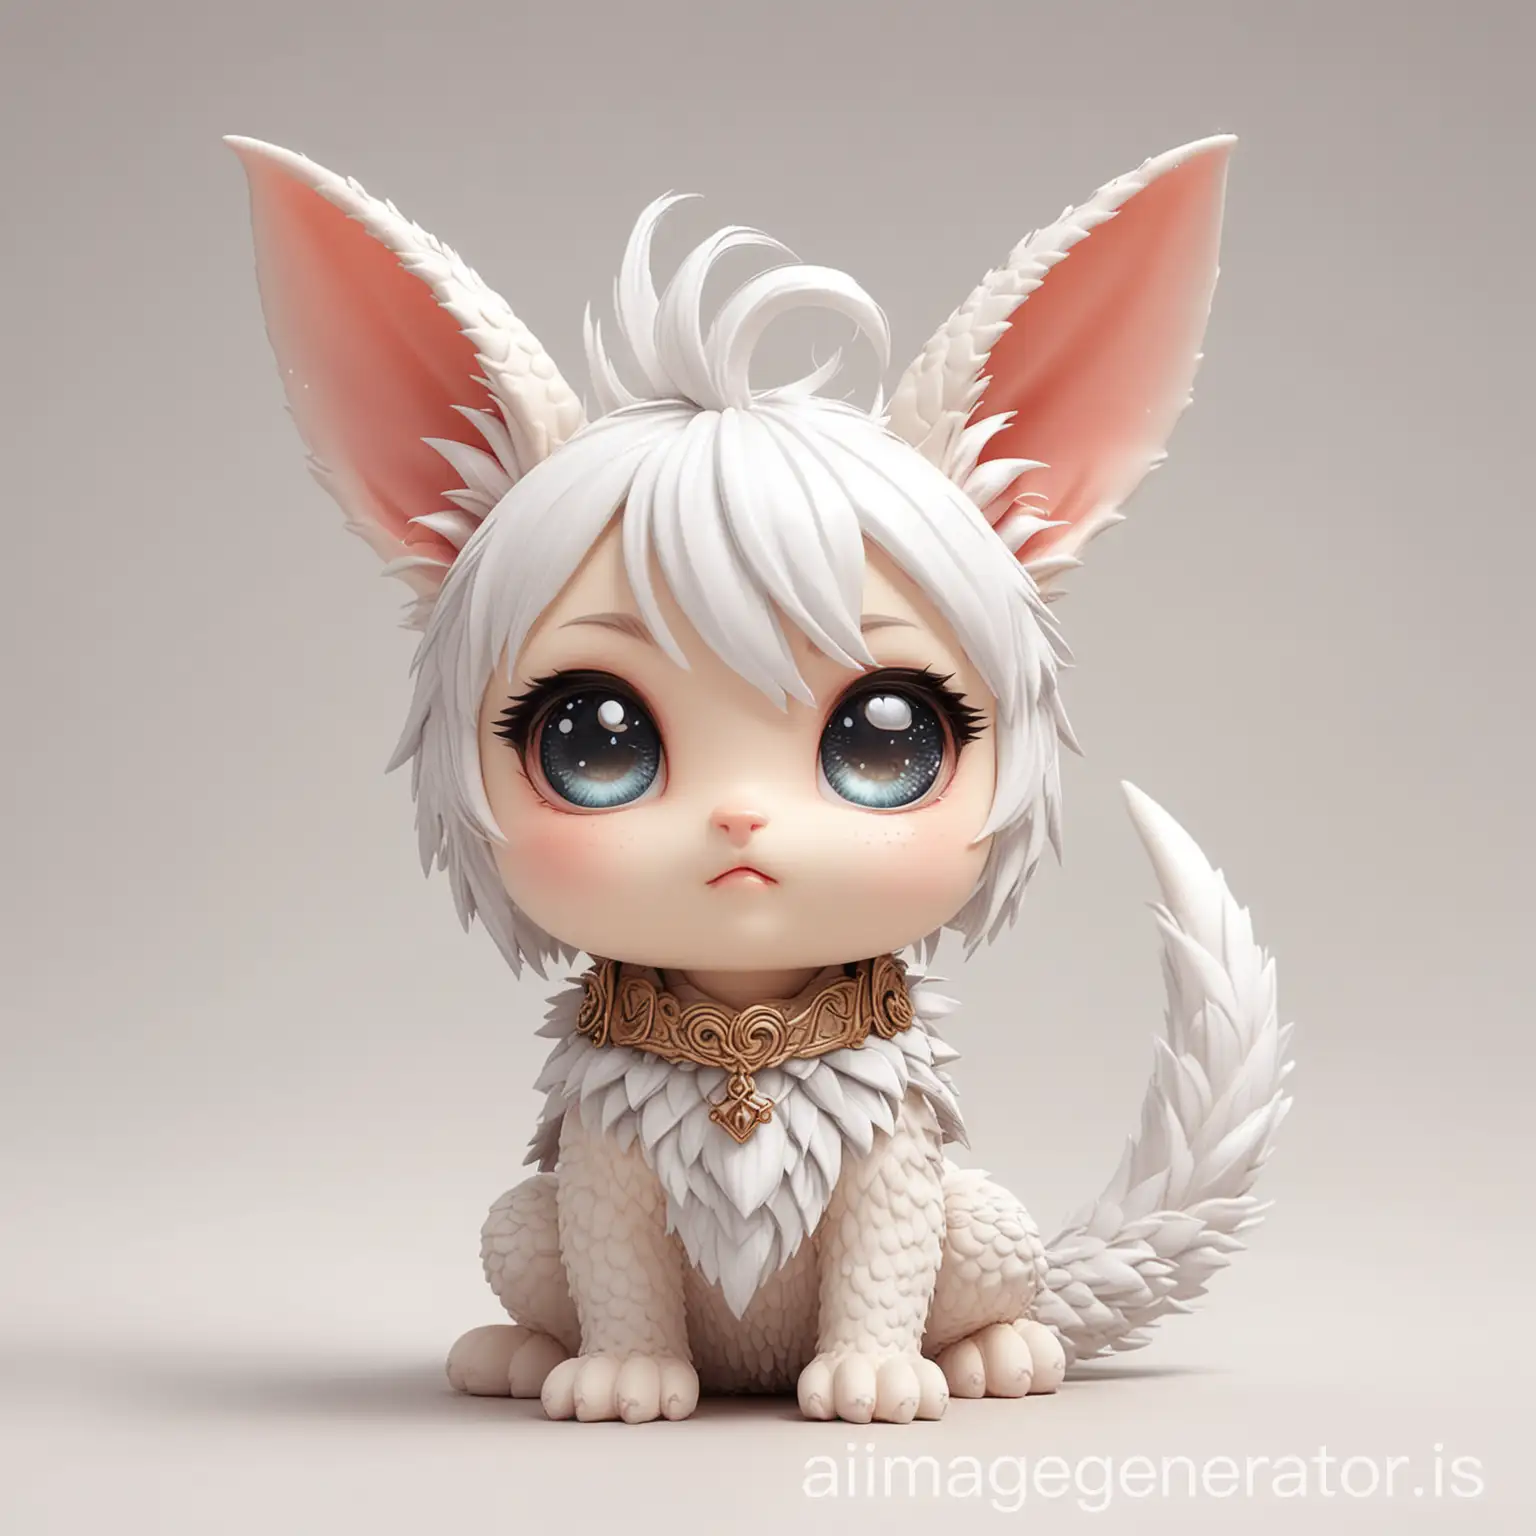 Character design Art toys: Chibi style, cute kitten, bunny ears, dragon tail in anime style, white background.